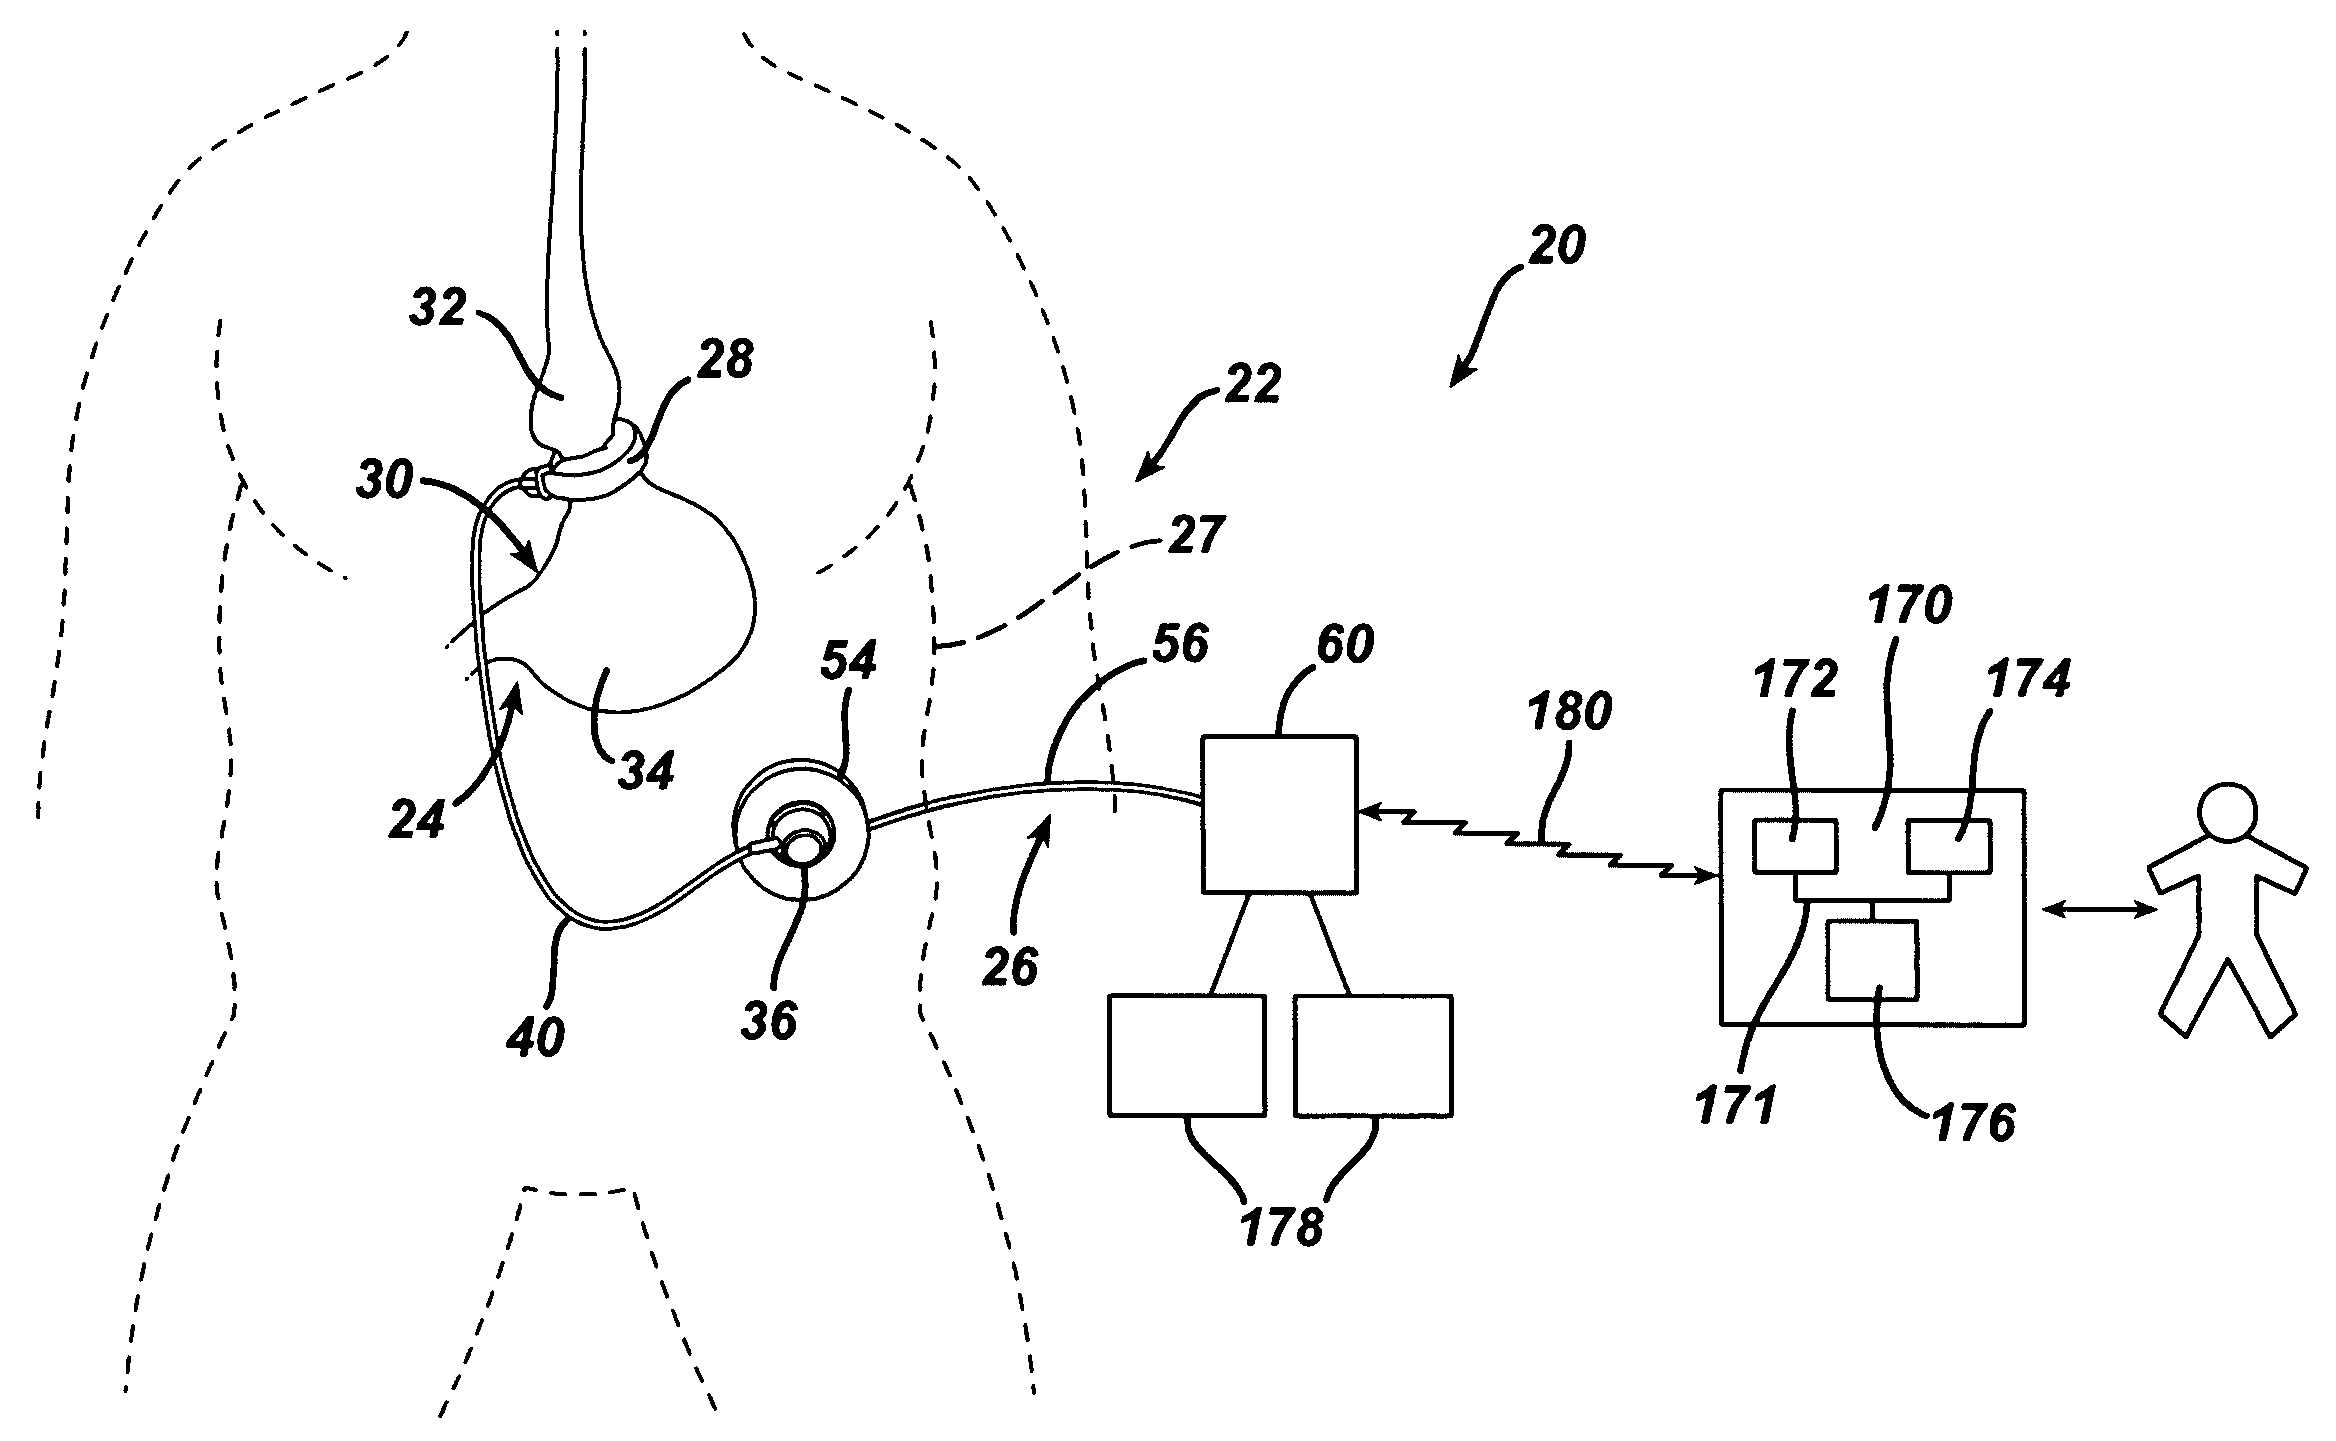 Gui With Trend Analysis for an Implantable Restriction Device and a Data Logger